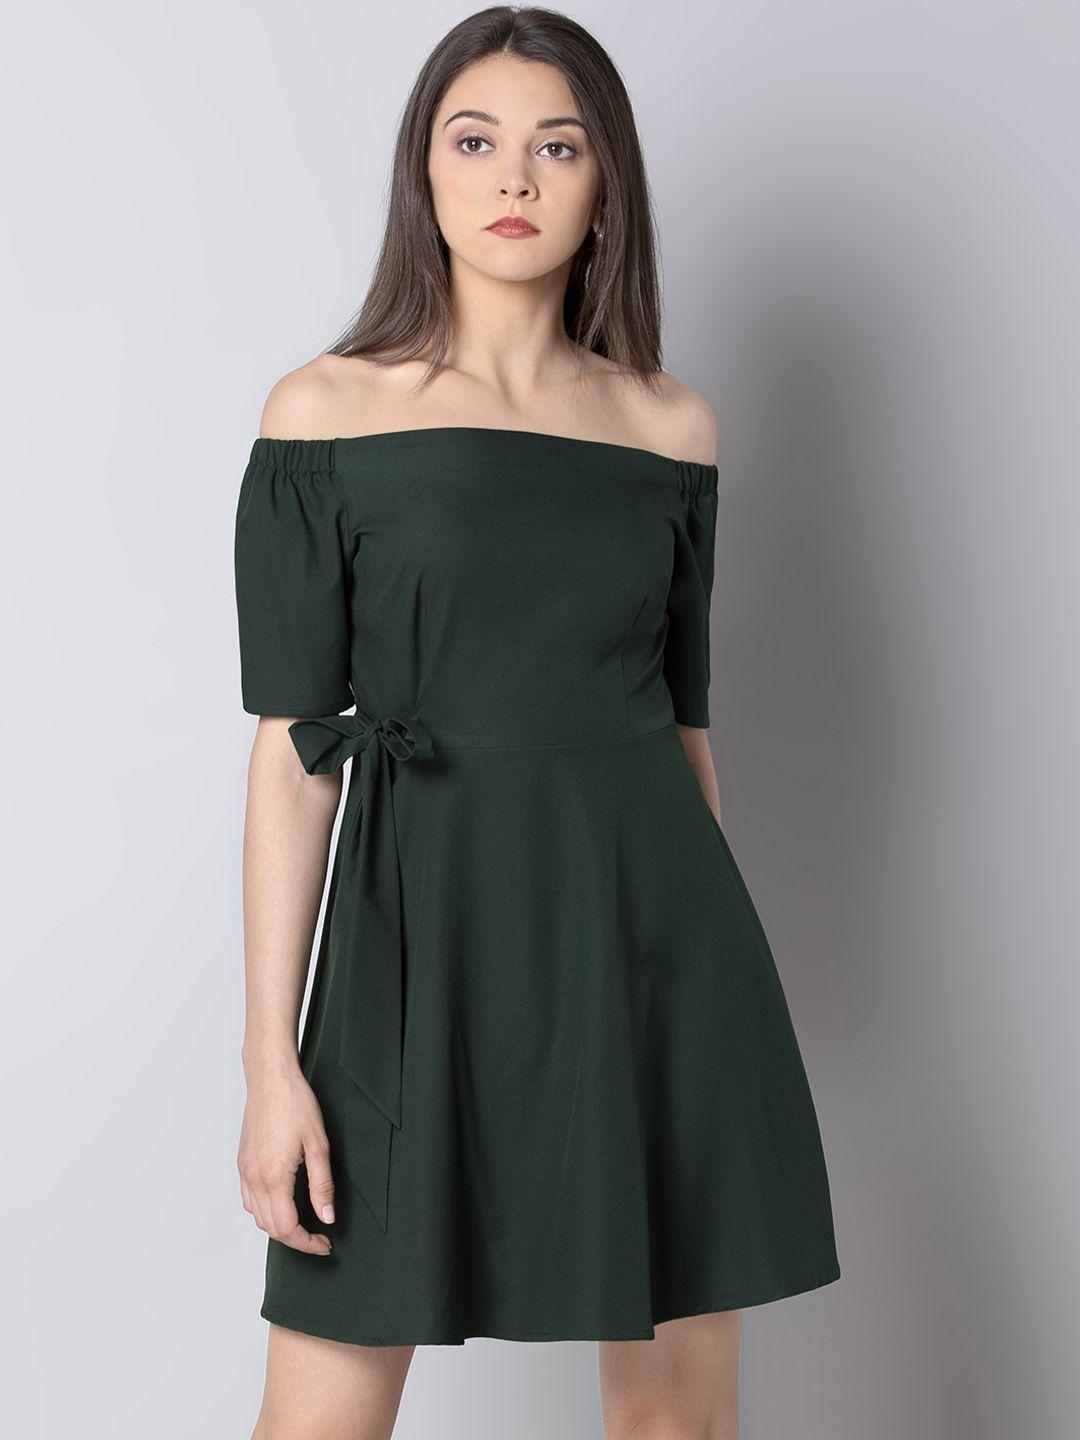 faballey women green fit and flare dress